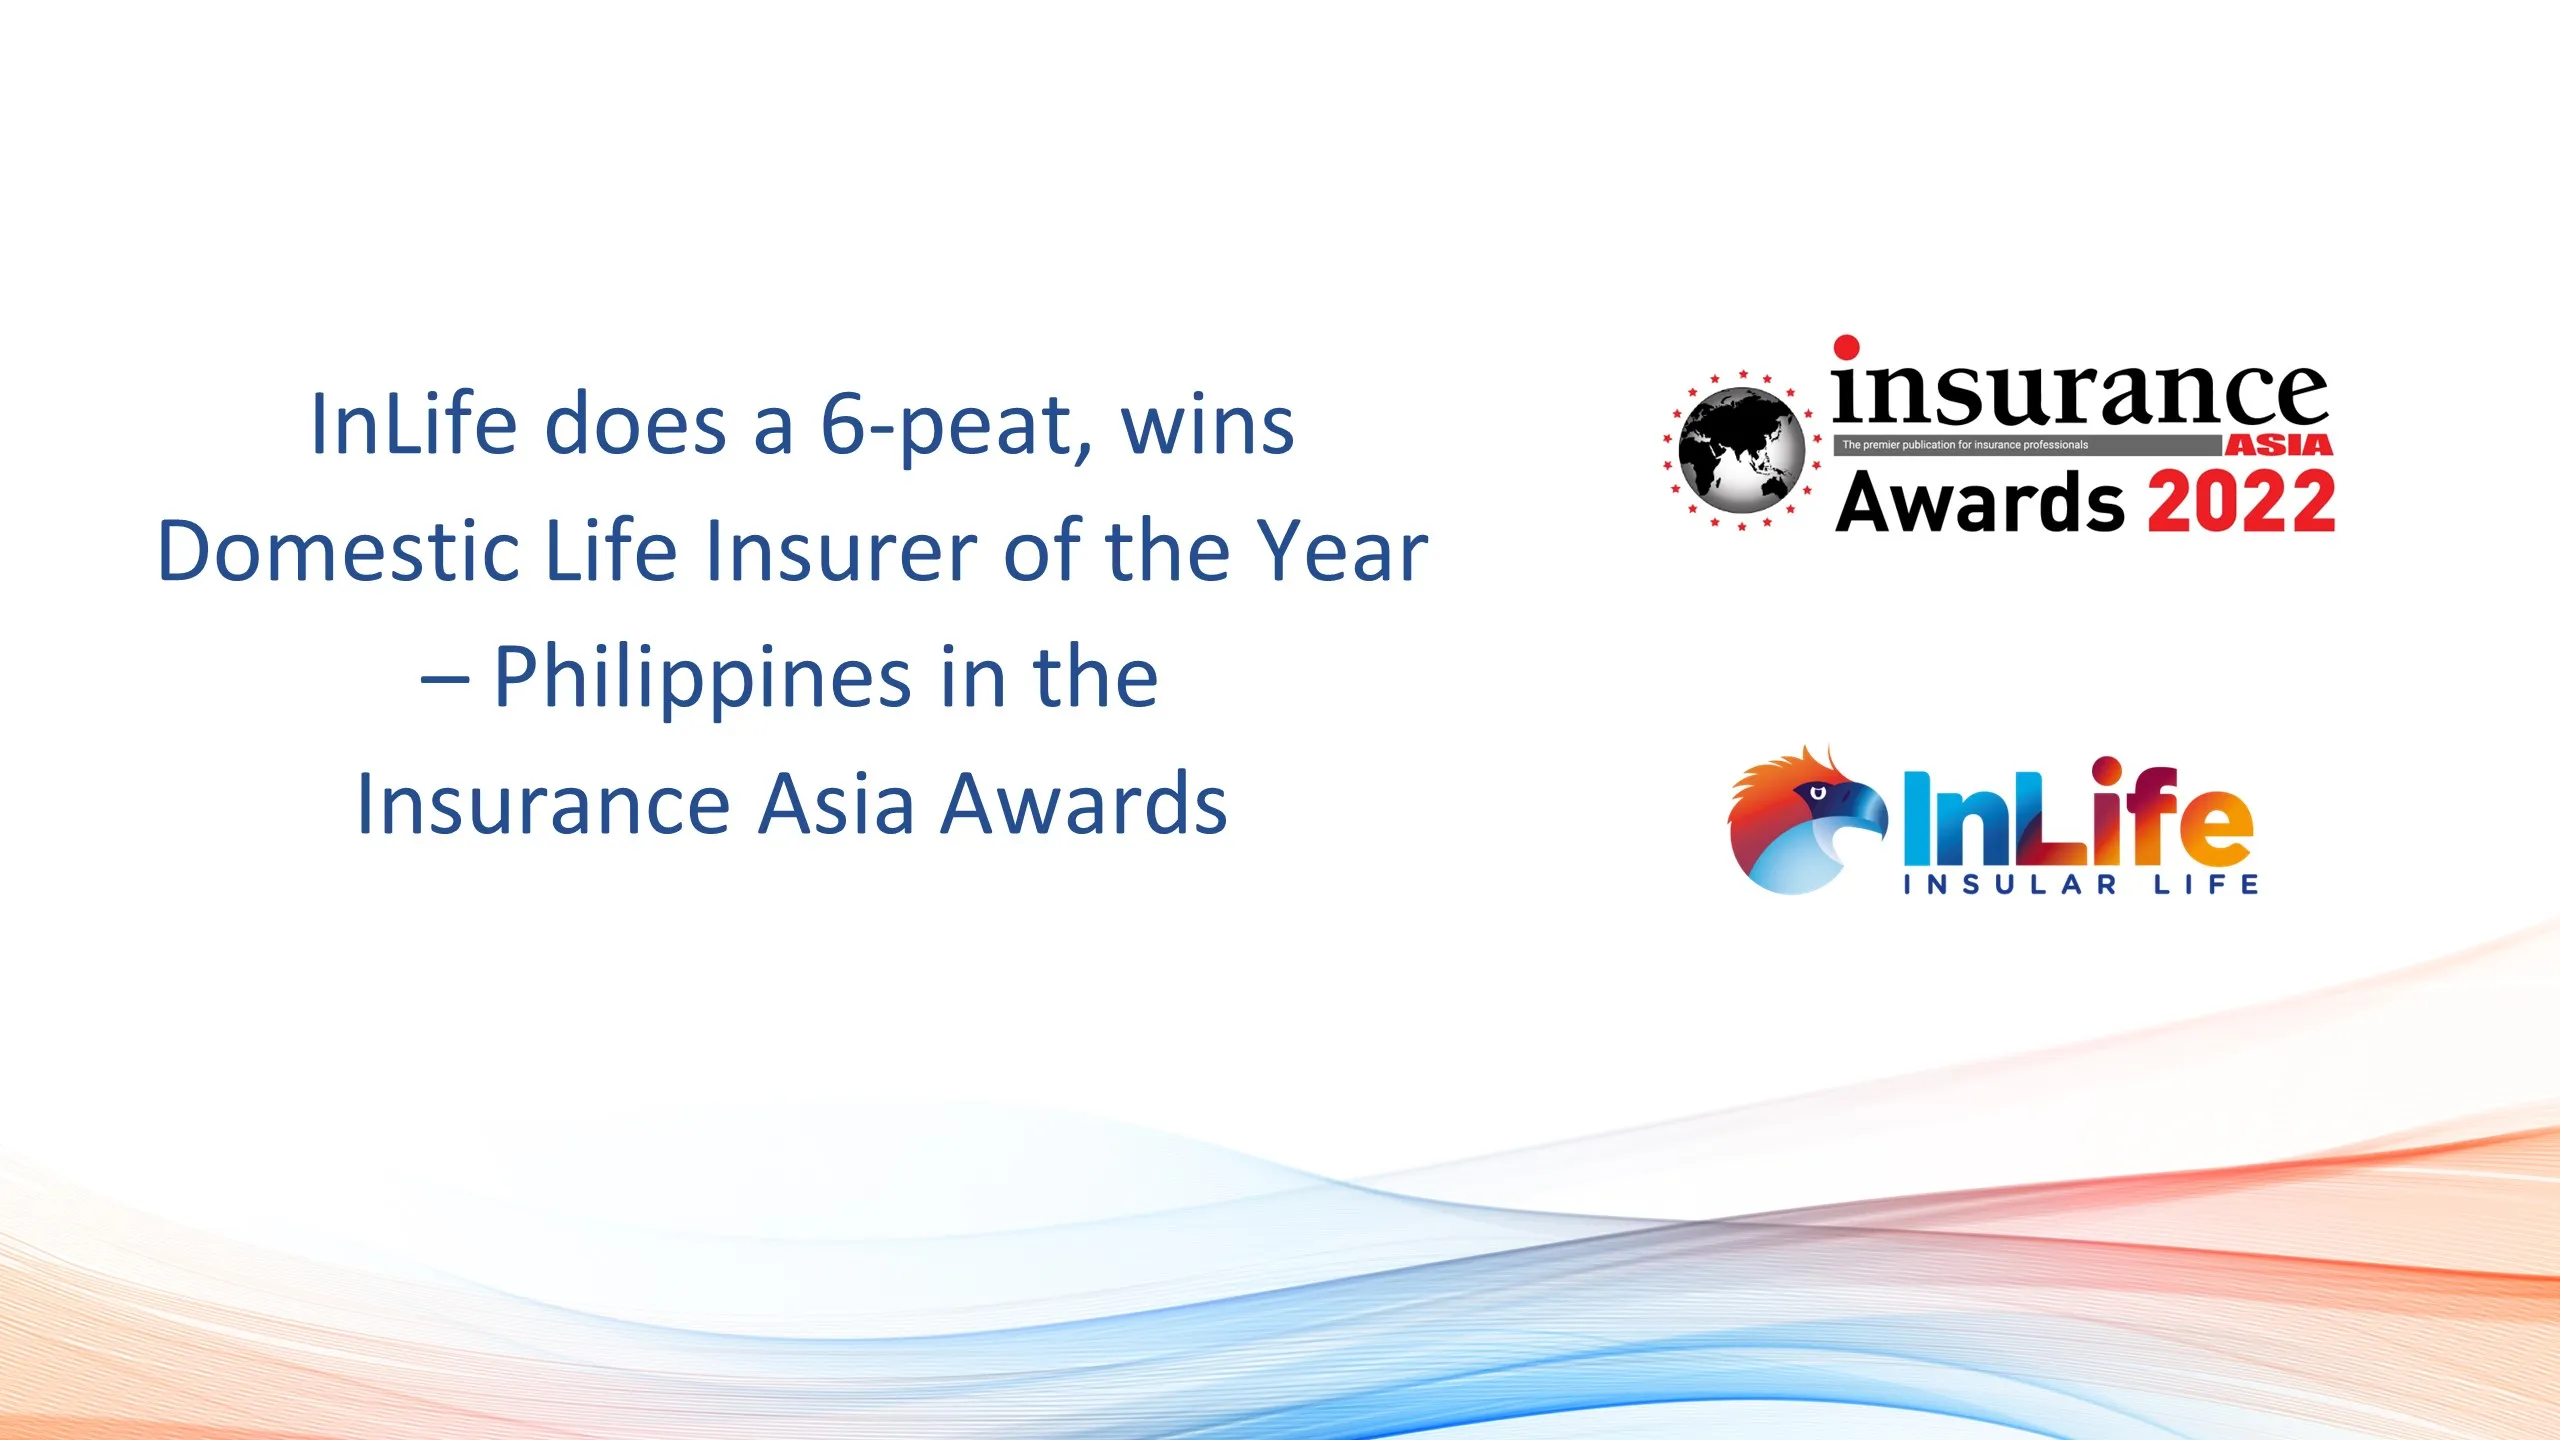 inlife-does-a-6-peat-wins-domestic-life-insurer-of-the-year-philippines-in-the-insurance-asia-awards